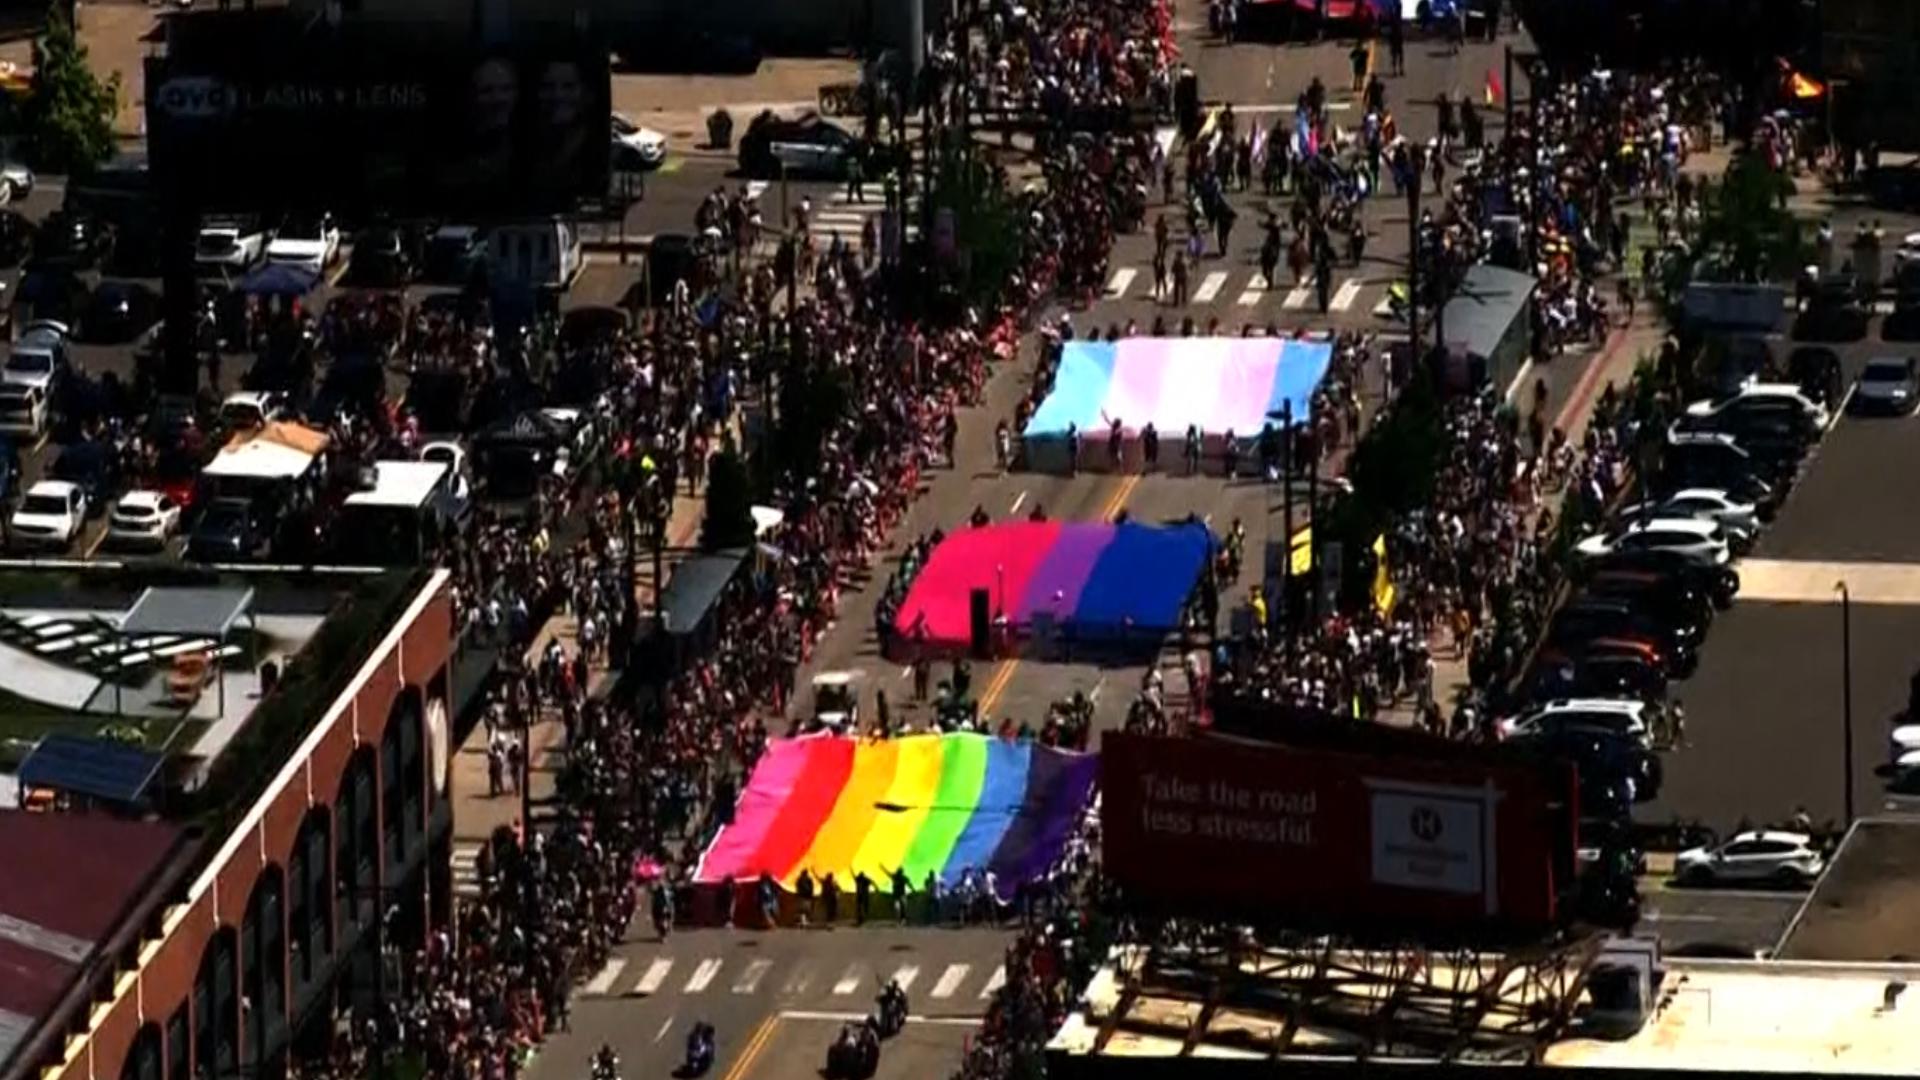 SKY 11 flew over downtown Minneapolis on Sunday as thousands of people took to the streets to celebrate.